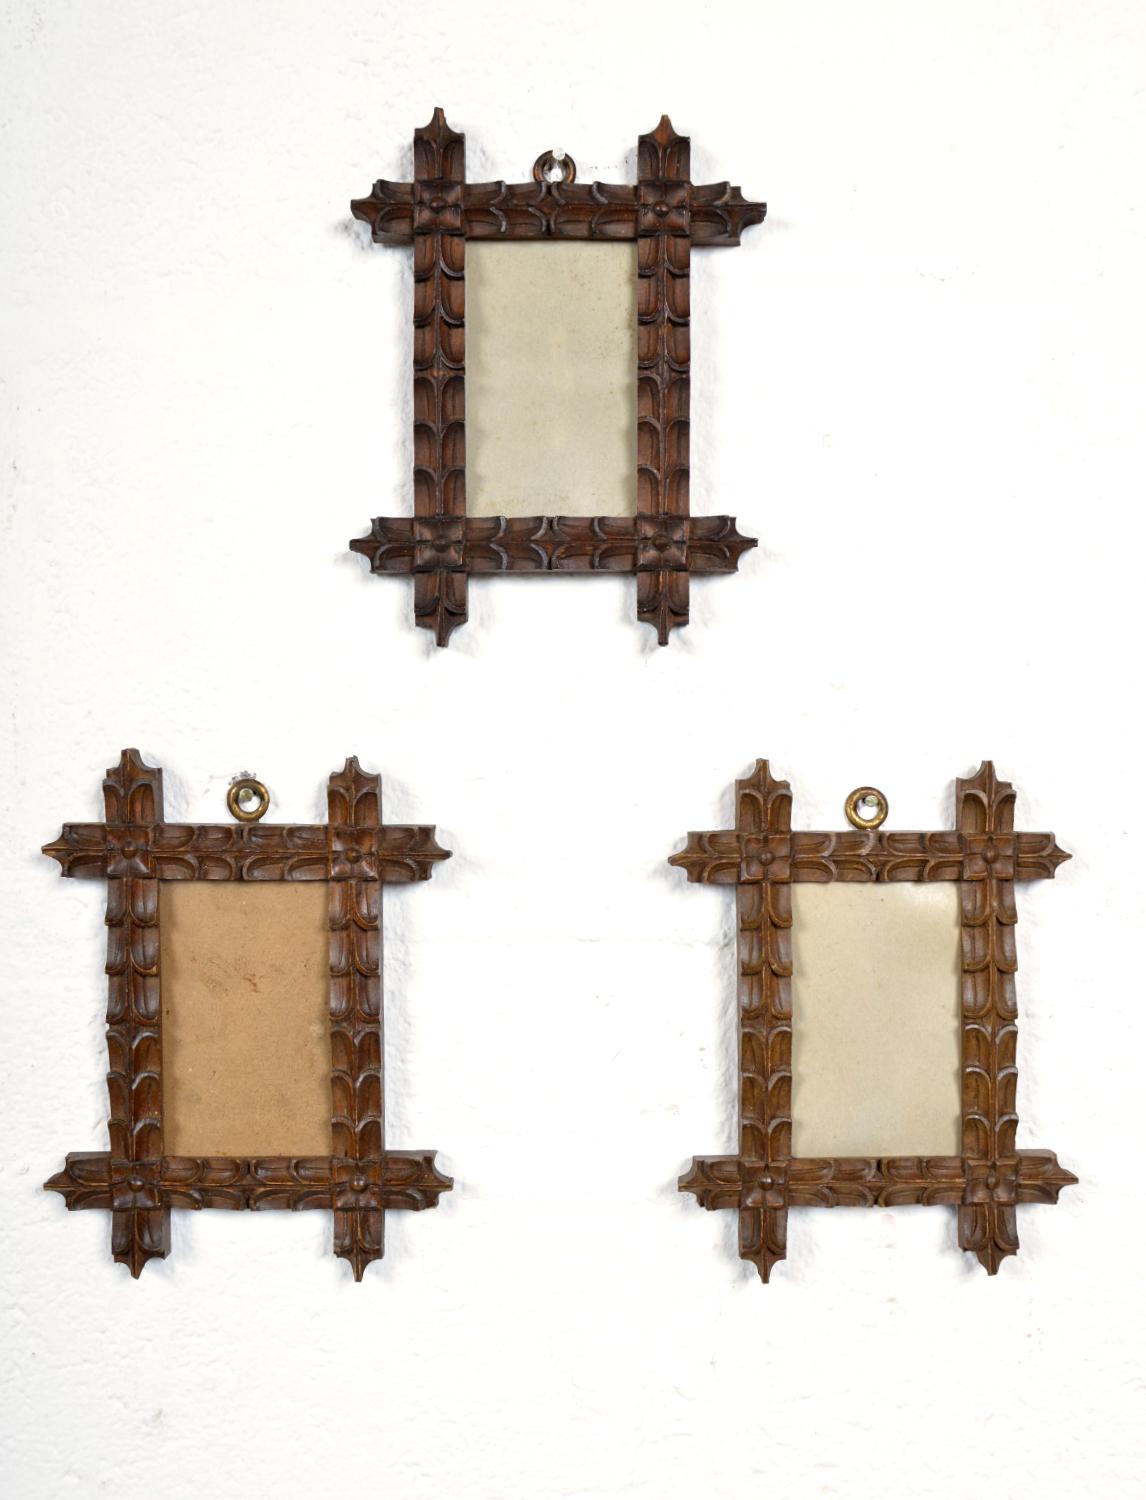 A beautifully carved set of three Bavarian picture frames elaborately carved using the ‘notch cut’ technique, each of the wooden frames is held together with a cross-lap joint. Dating from the mid 19th Century, the set of three matching hand-carved